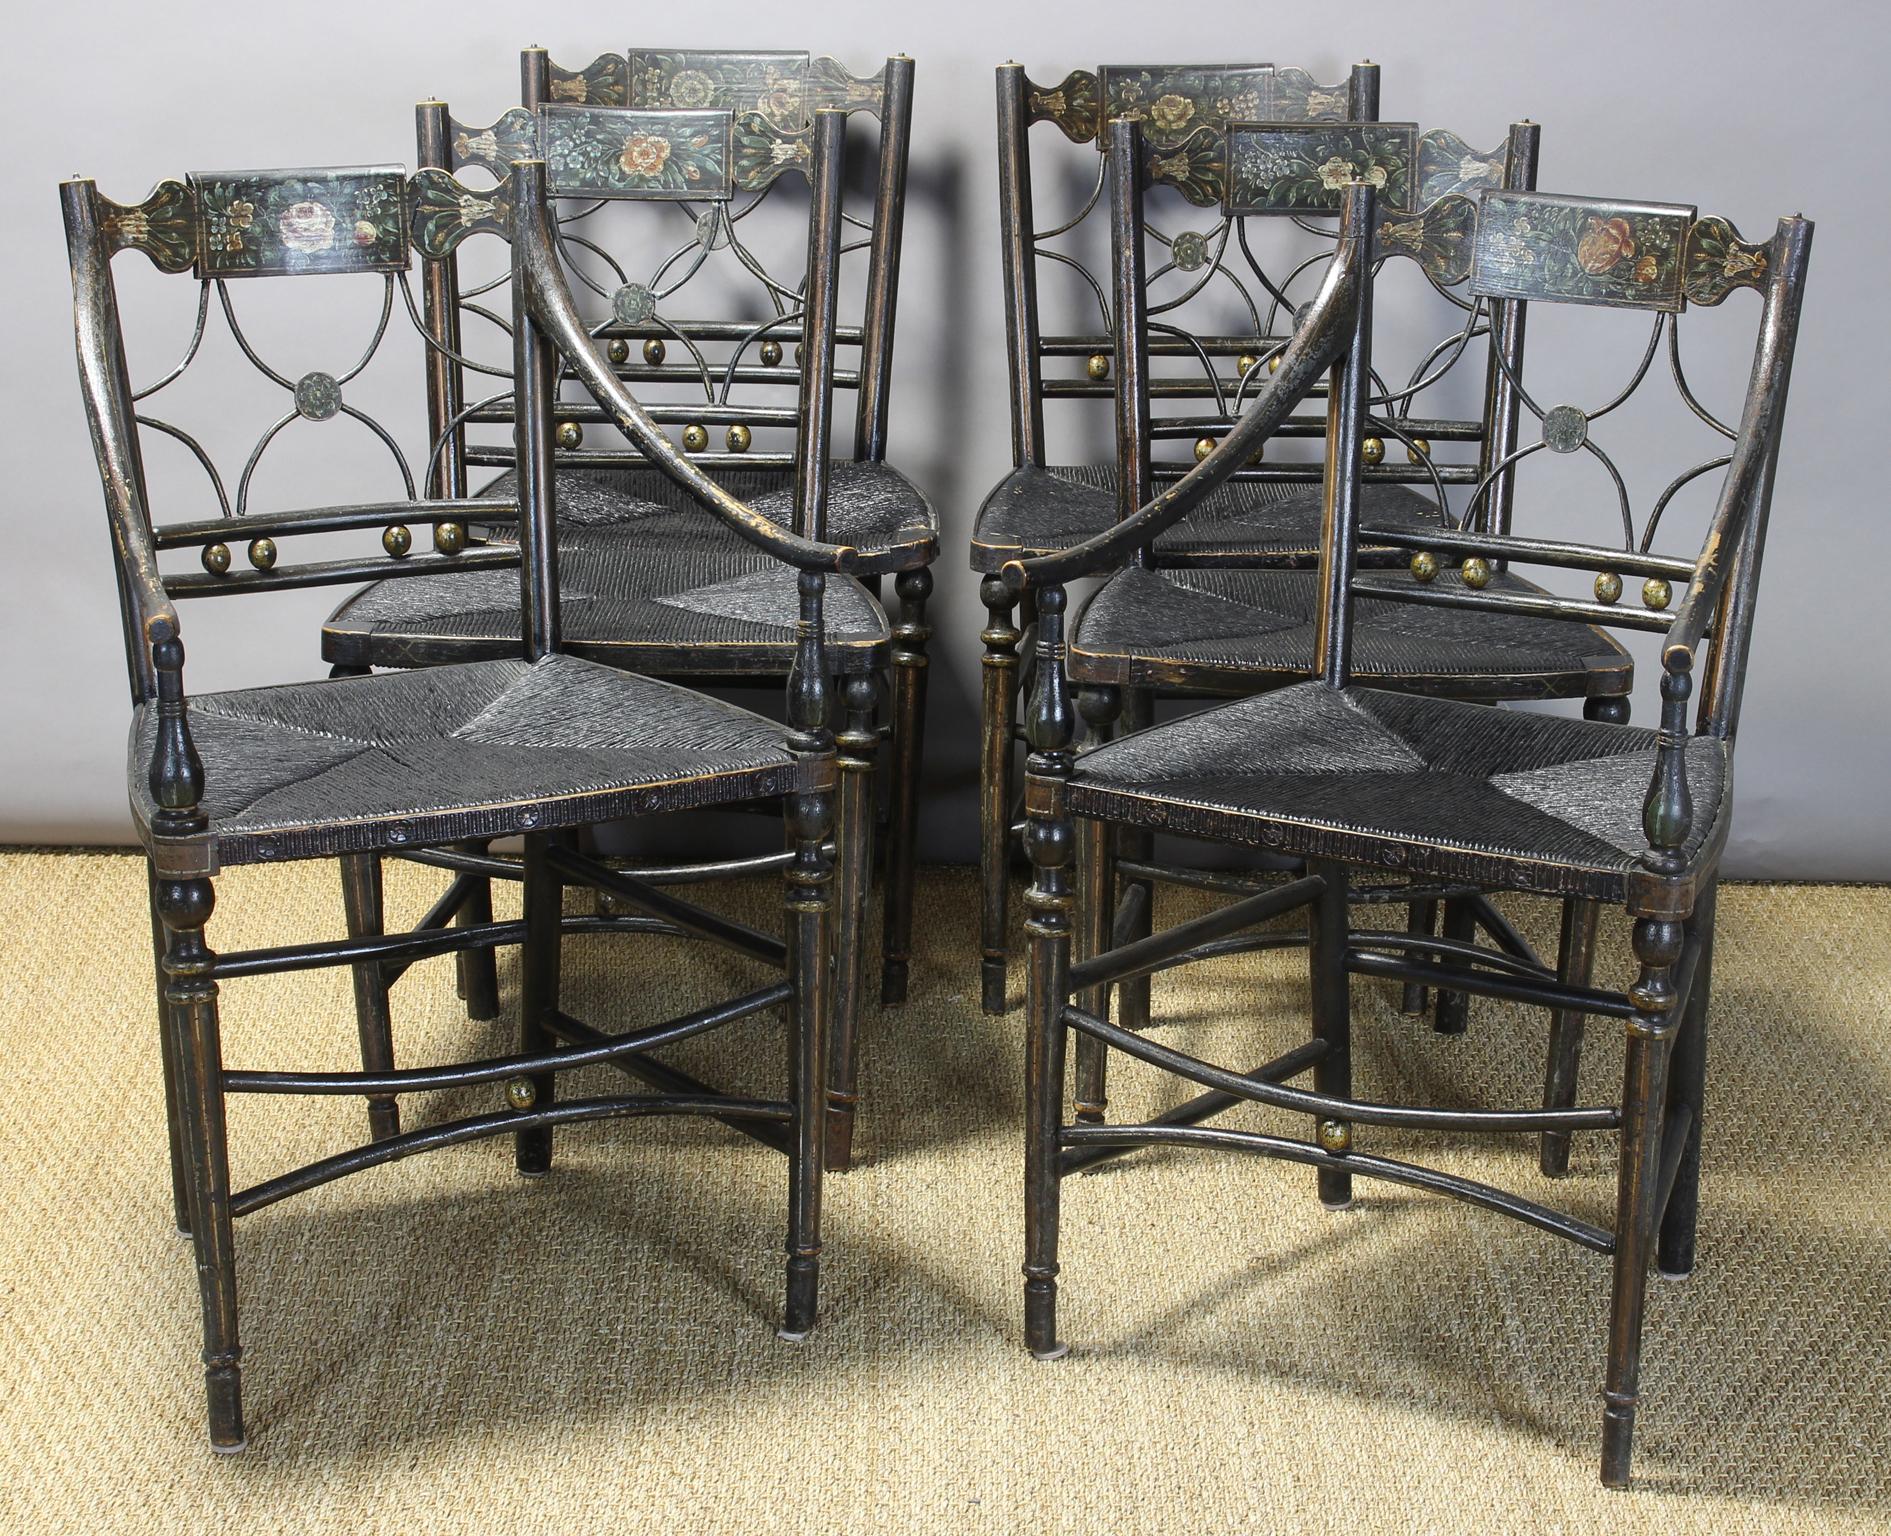 This exceptionally charming early 19th century American dining chairs are finely developed throughout with elegant lines, sturdy construction and beautiful paint and gilt decoration. Each crest rail is beautifully embellished with a unique hand